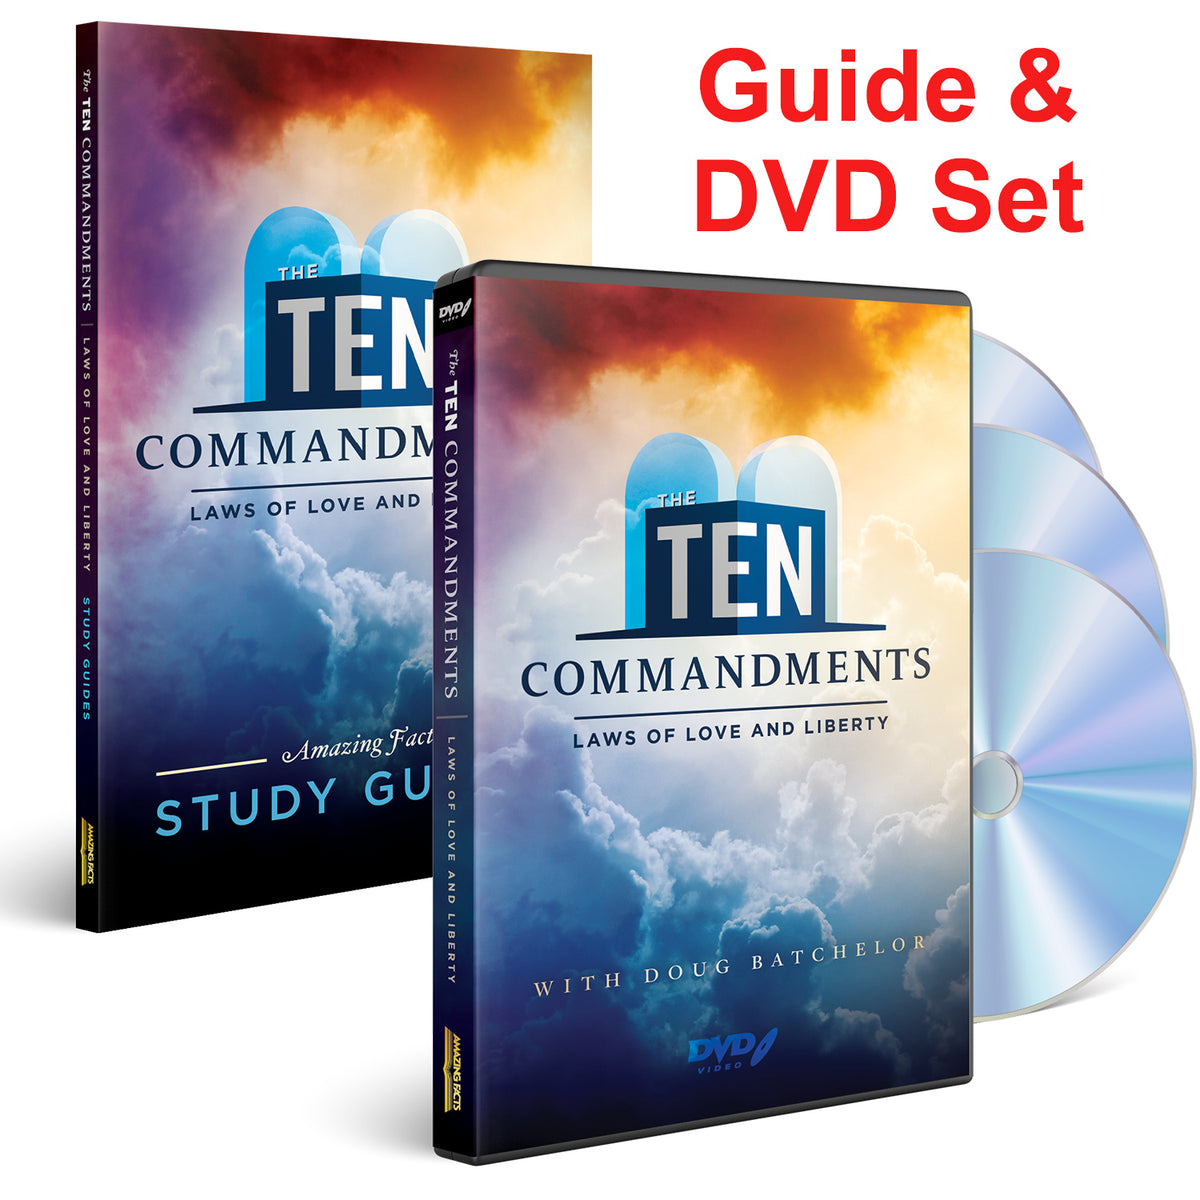 The Ten Commandments: DVD and Guide Set by Doug Batchelor